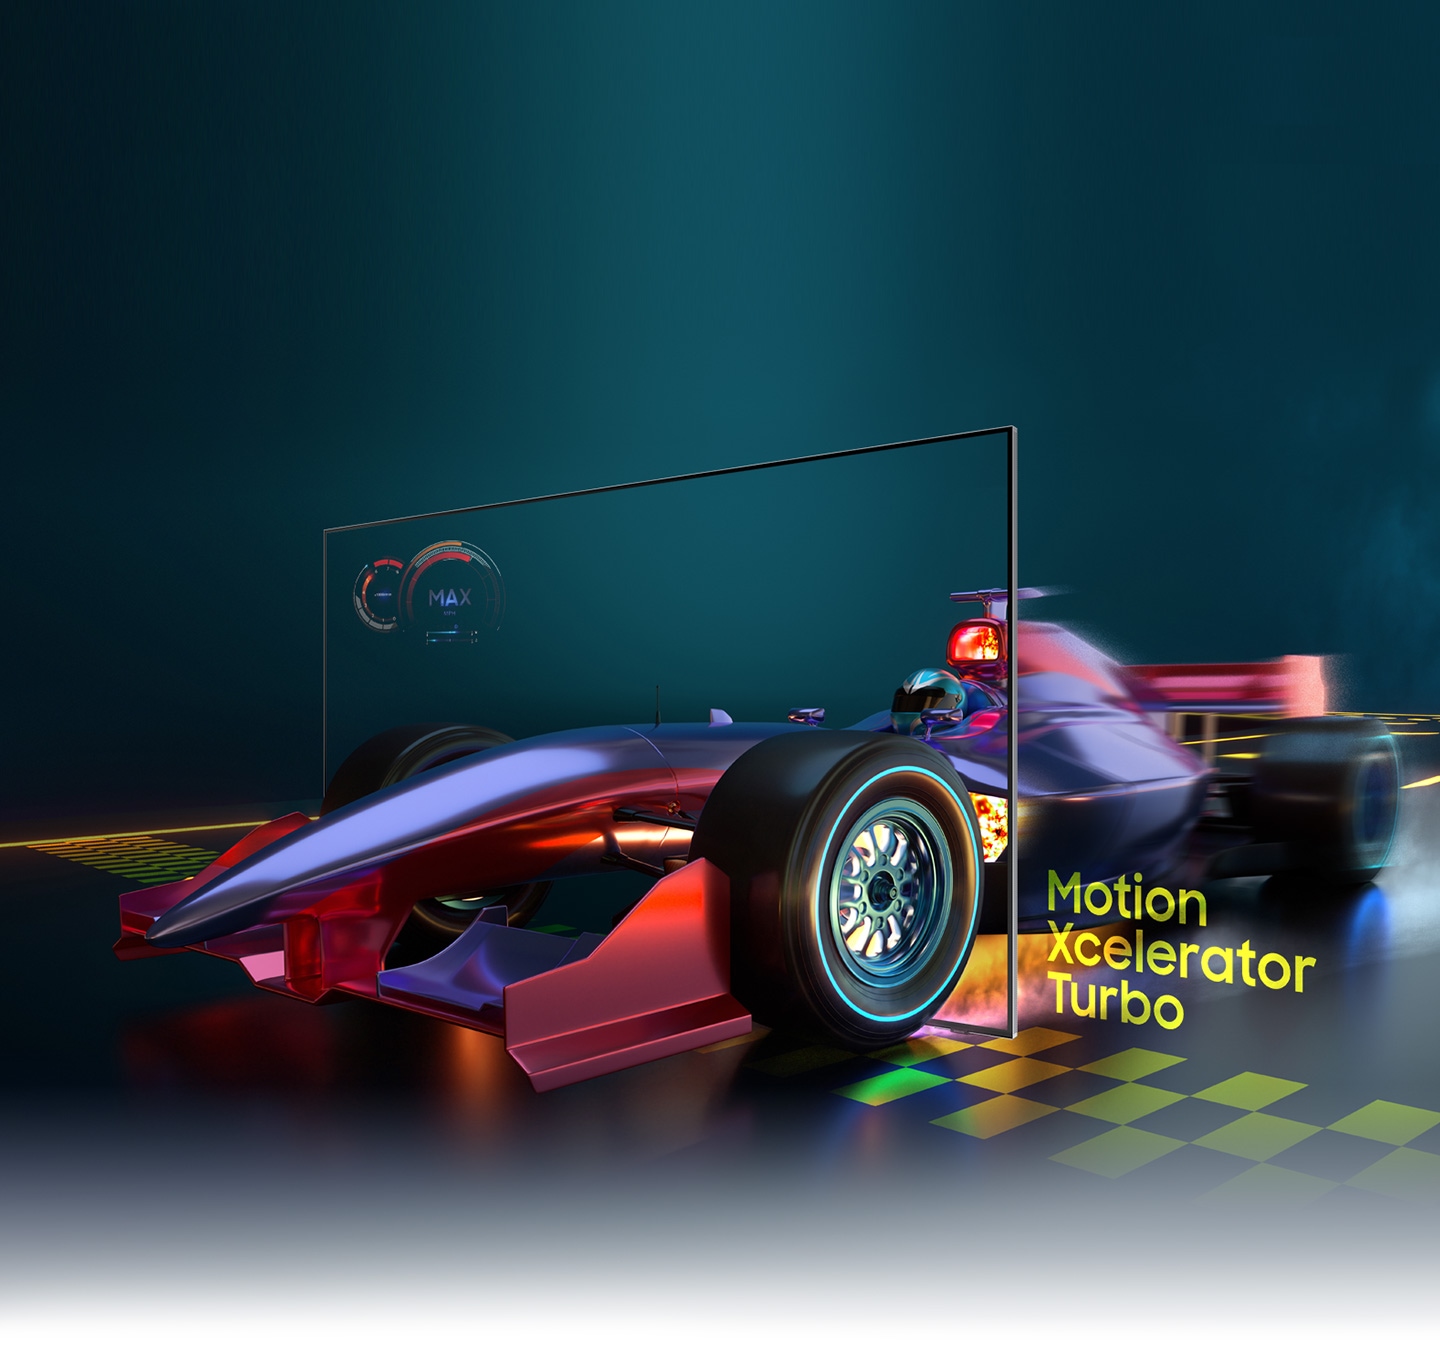 The image of a race car looks clear and visible inside the QN700A screen due to motion xcelerator turbo technology.